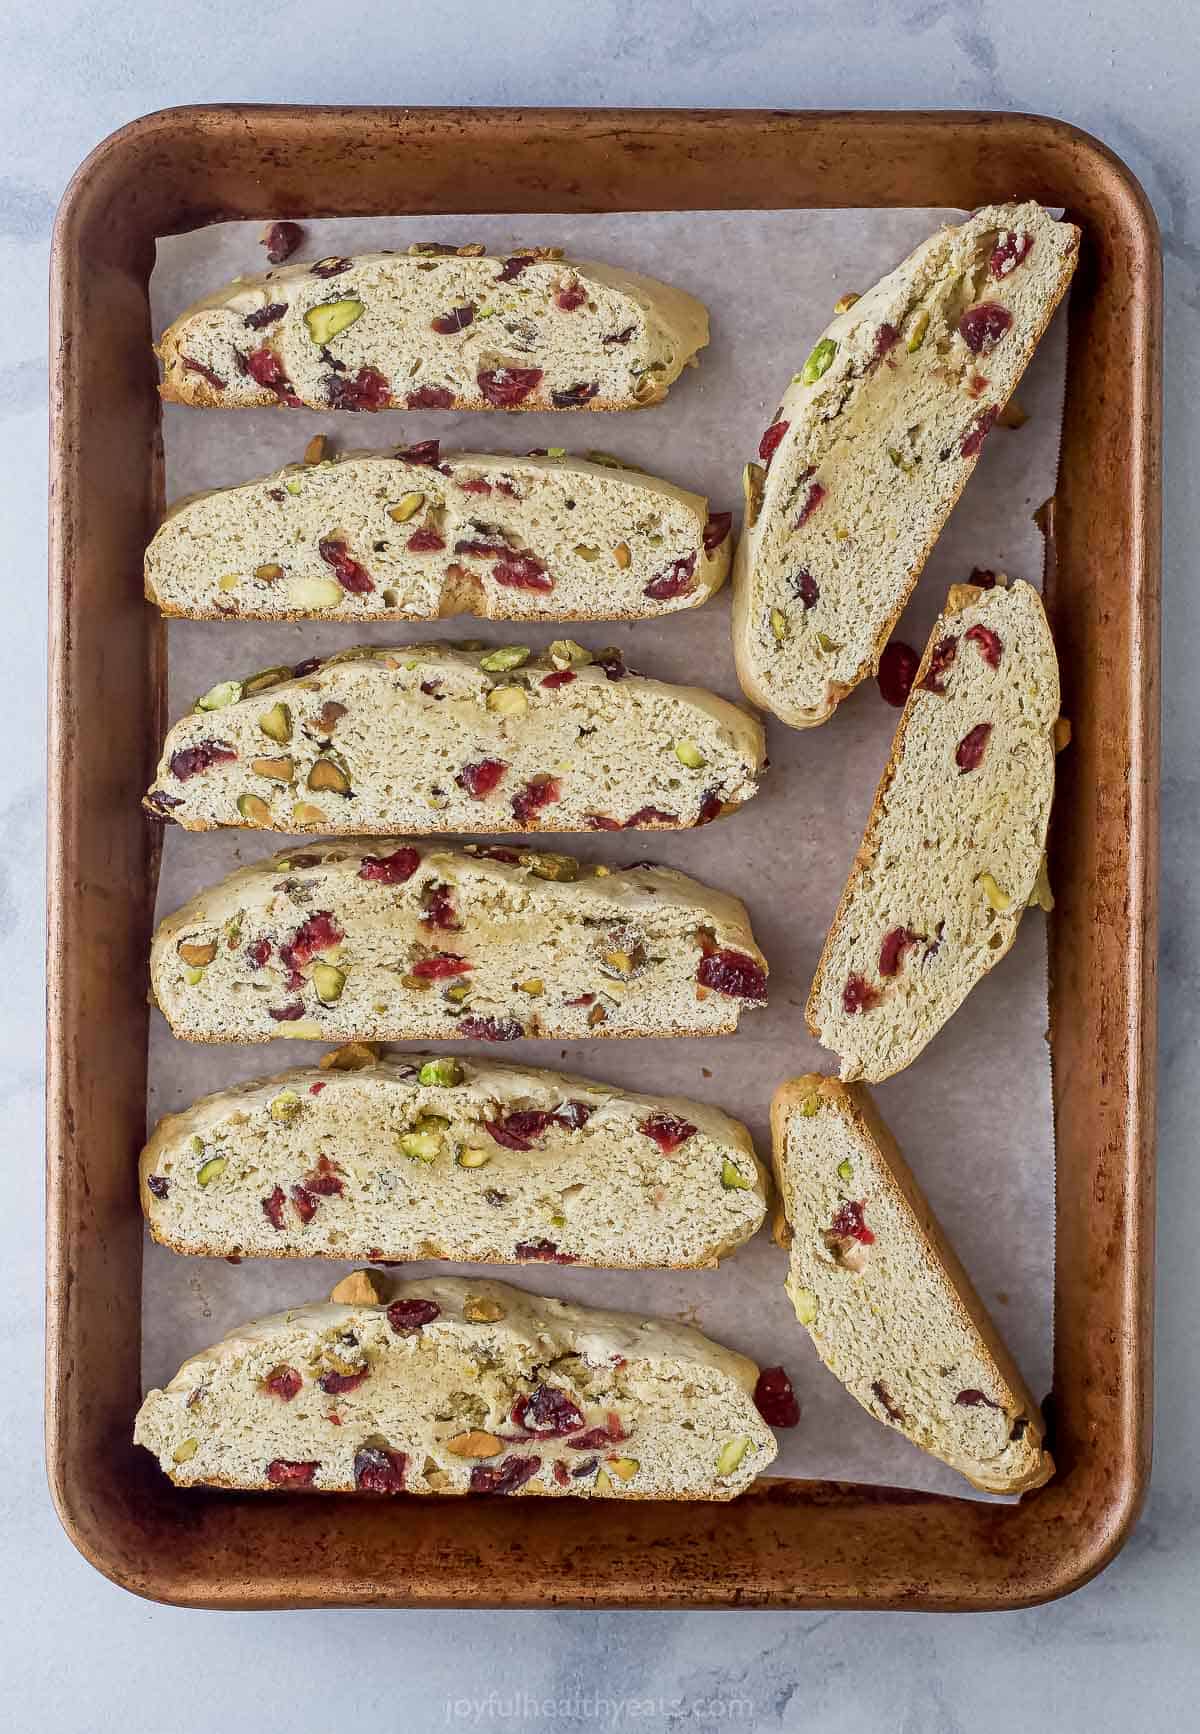 Nine pieces of partially-baked biscotti on a parchment-lined baking sheet